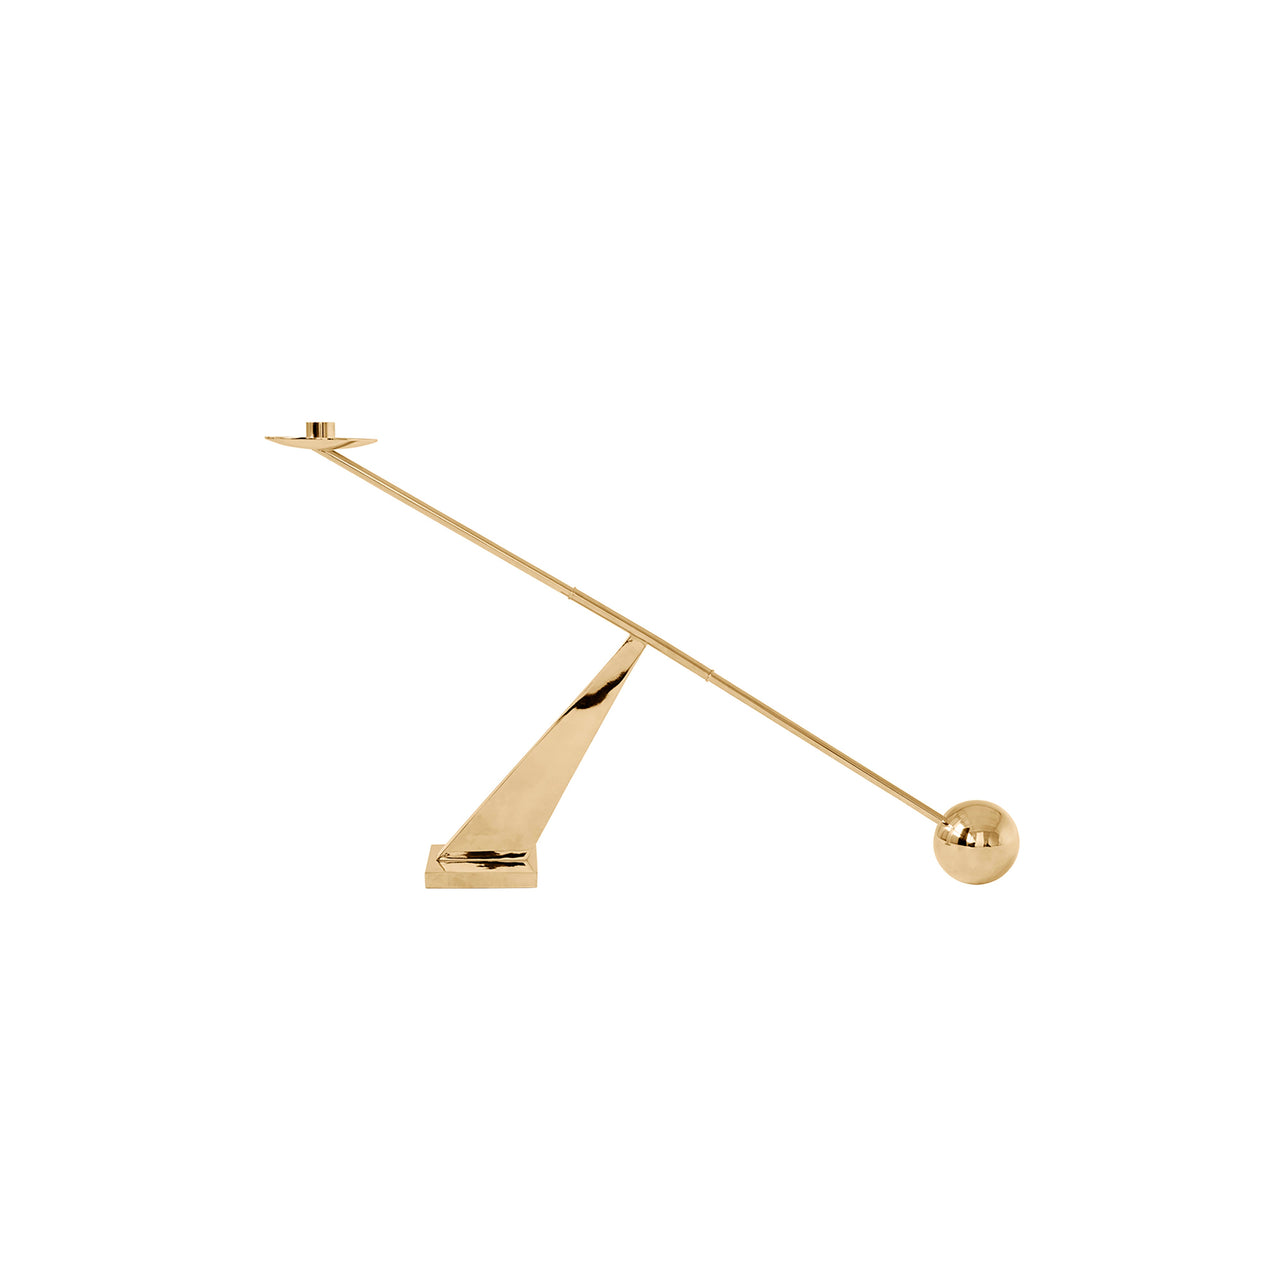 Interconnect Candle Holder: Polished Brass